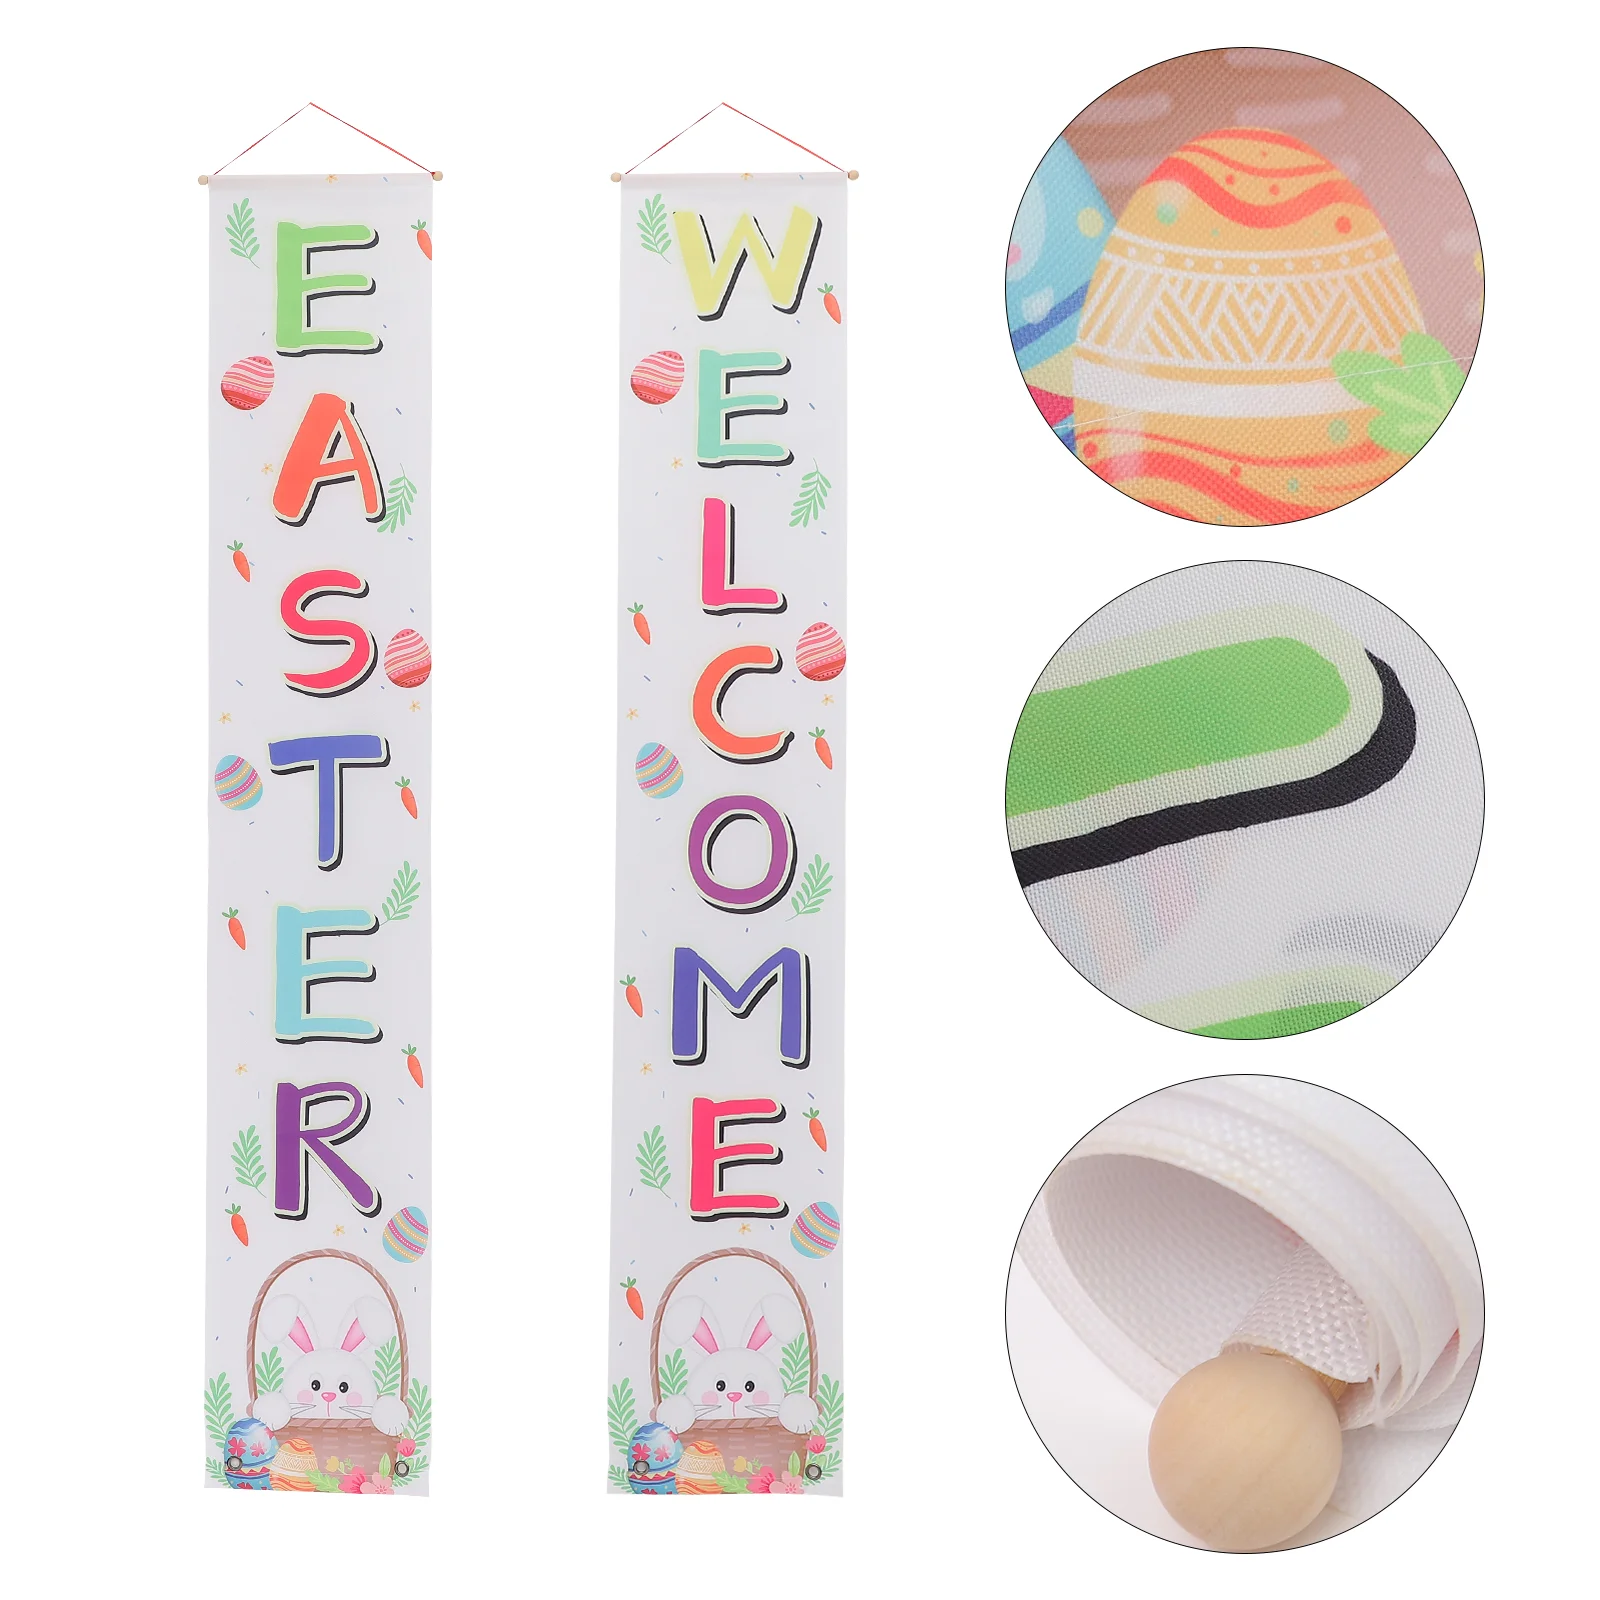 

Easter Door Sign Decorations Wall Hanging Porch Banner Banners Bunny Happy Welcome Spring Outdoor Backdrop Party Rabbit Supplies